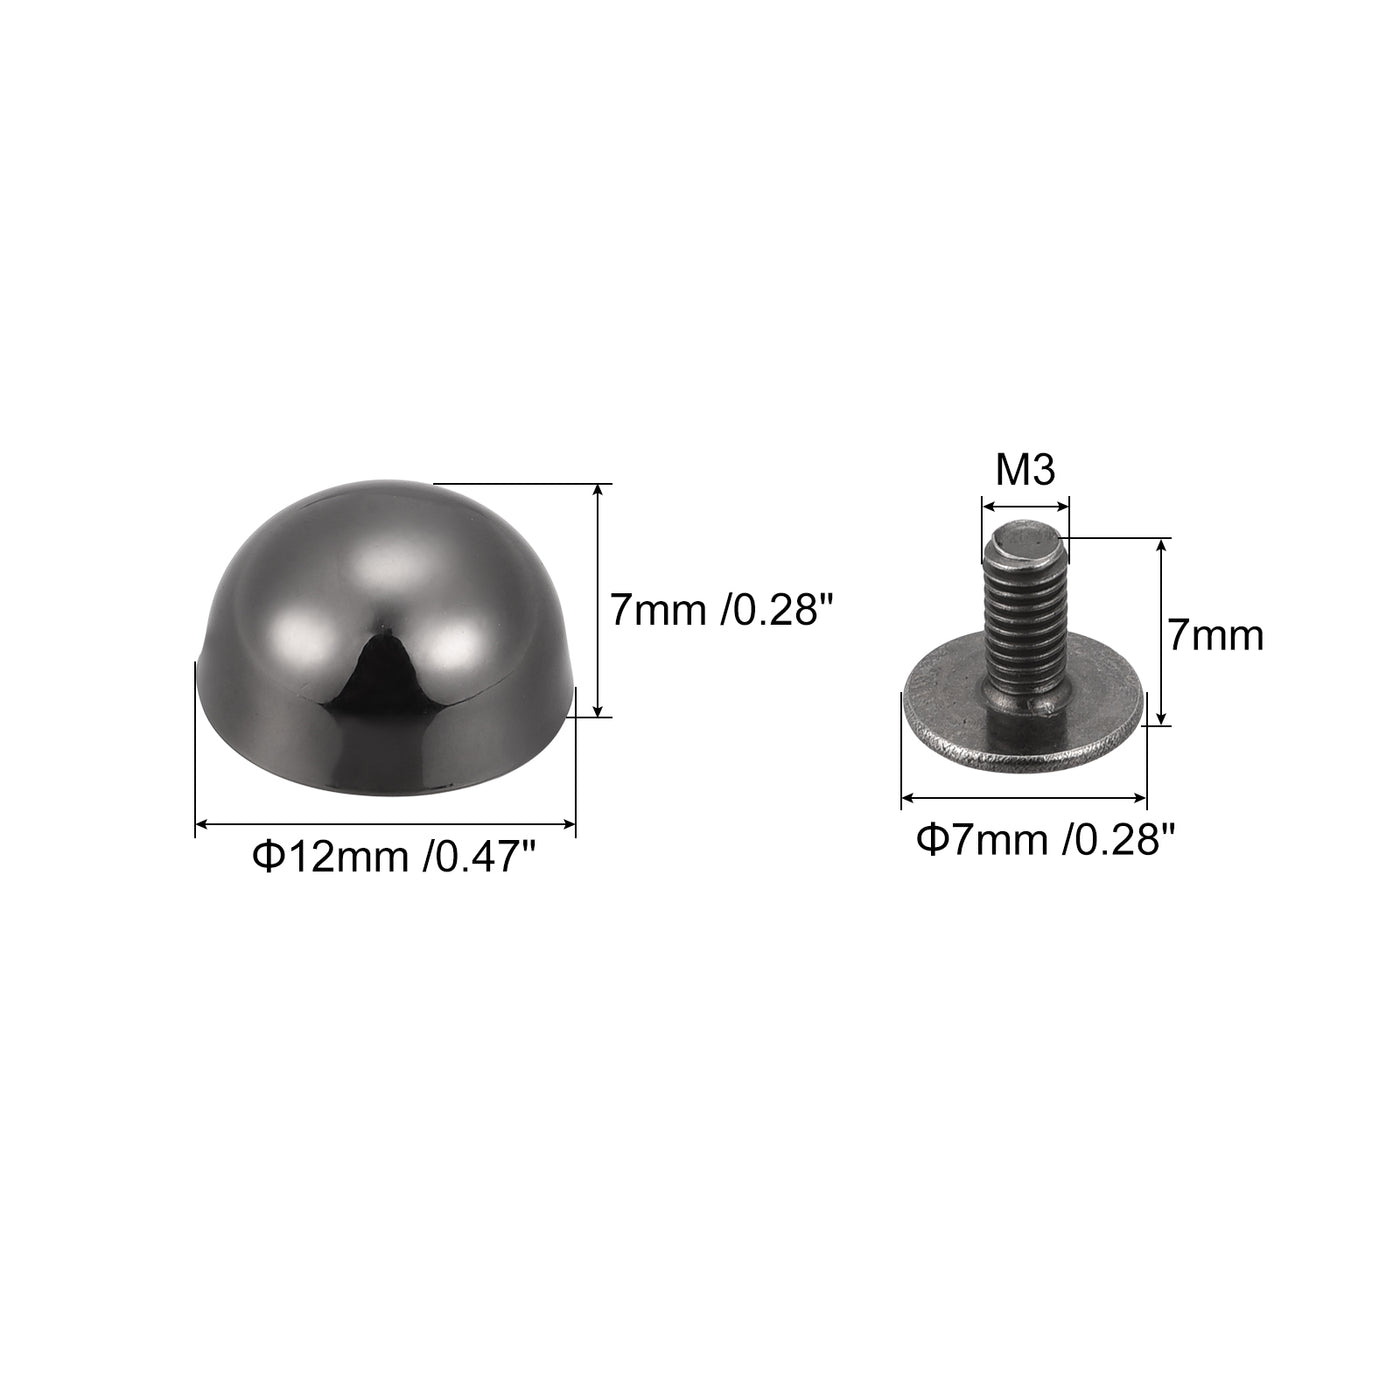 Uxcell Uxcell 12x7mm Screw Back Rivets Hollow Round Head Leather Studs Silver Tone 20 Sets